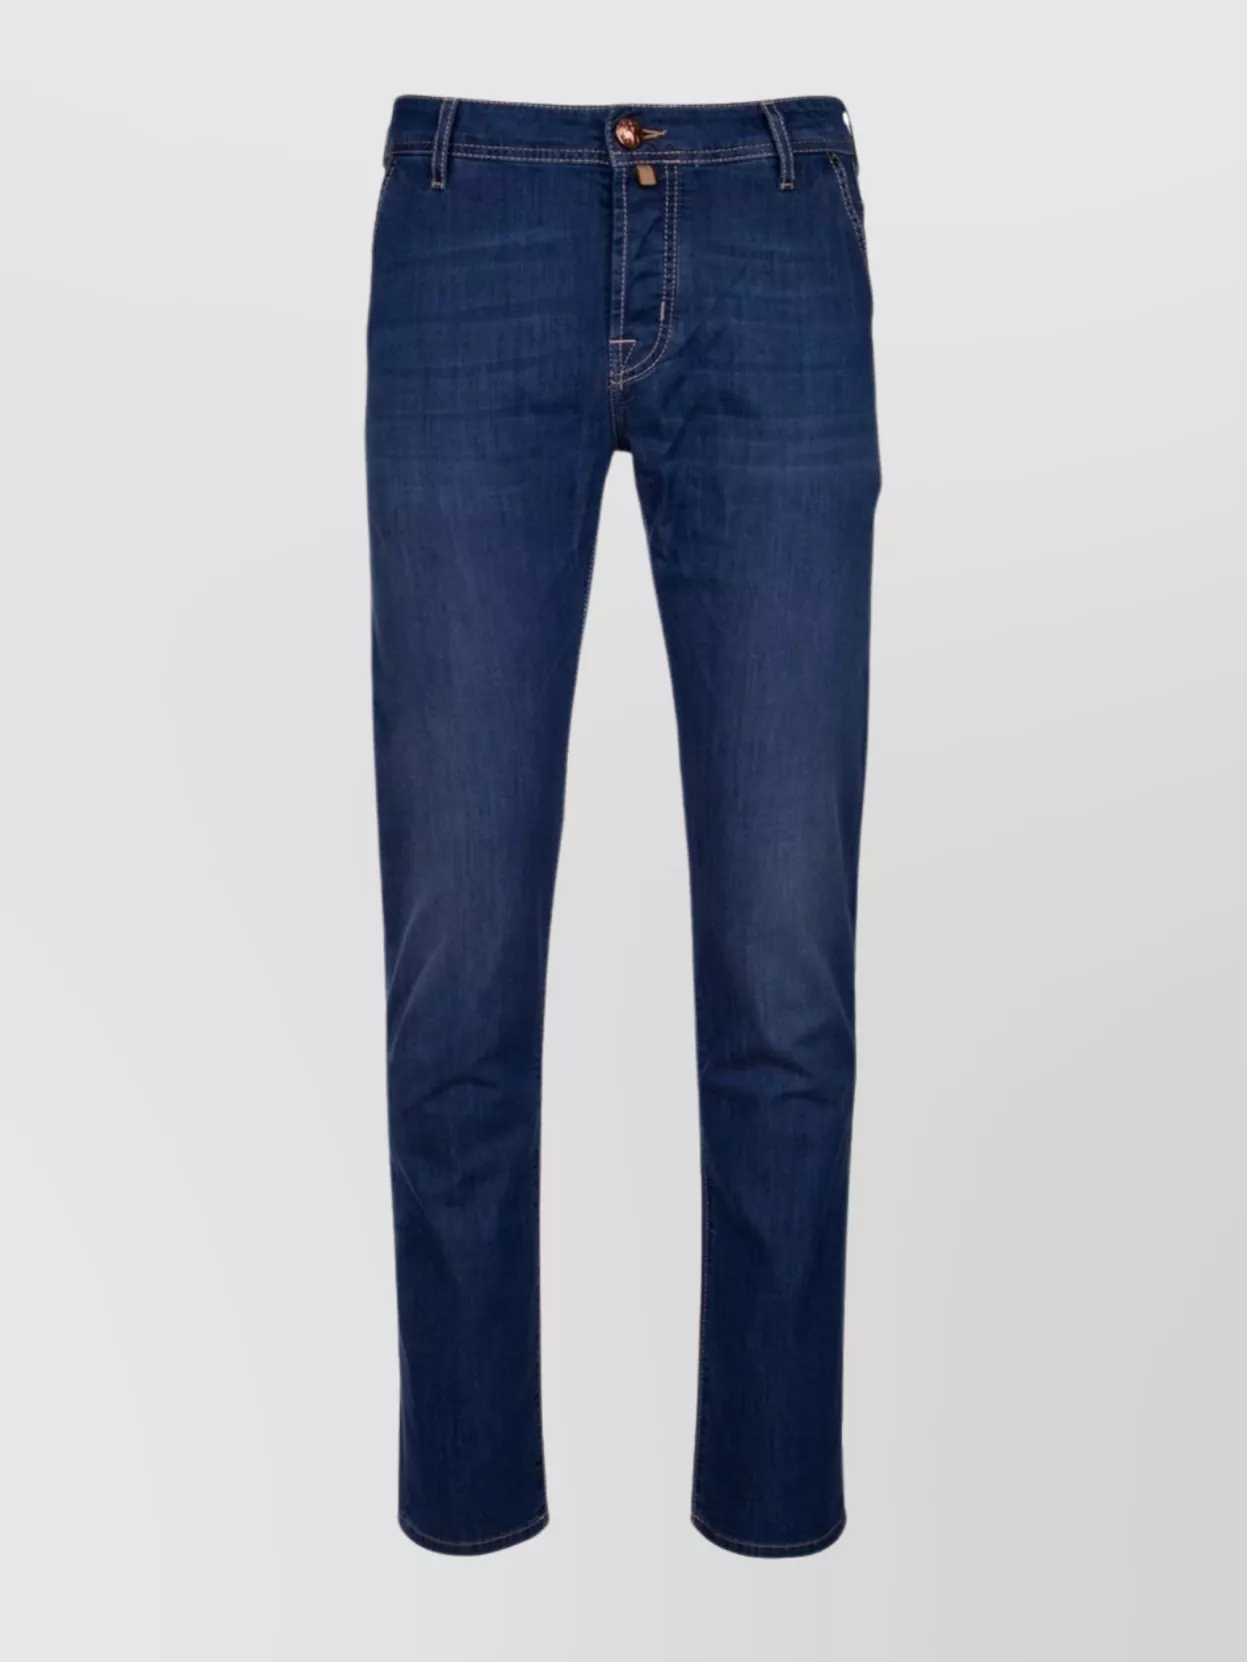 Jacob Cohen Denim Trousers With Belt Loops And Contrast Stitching In Blue